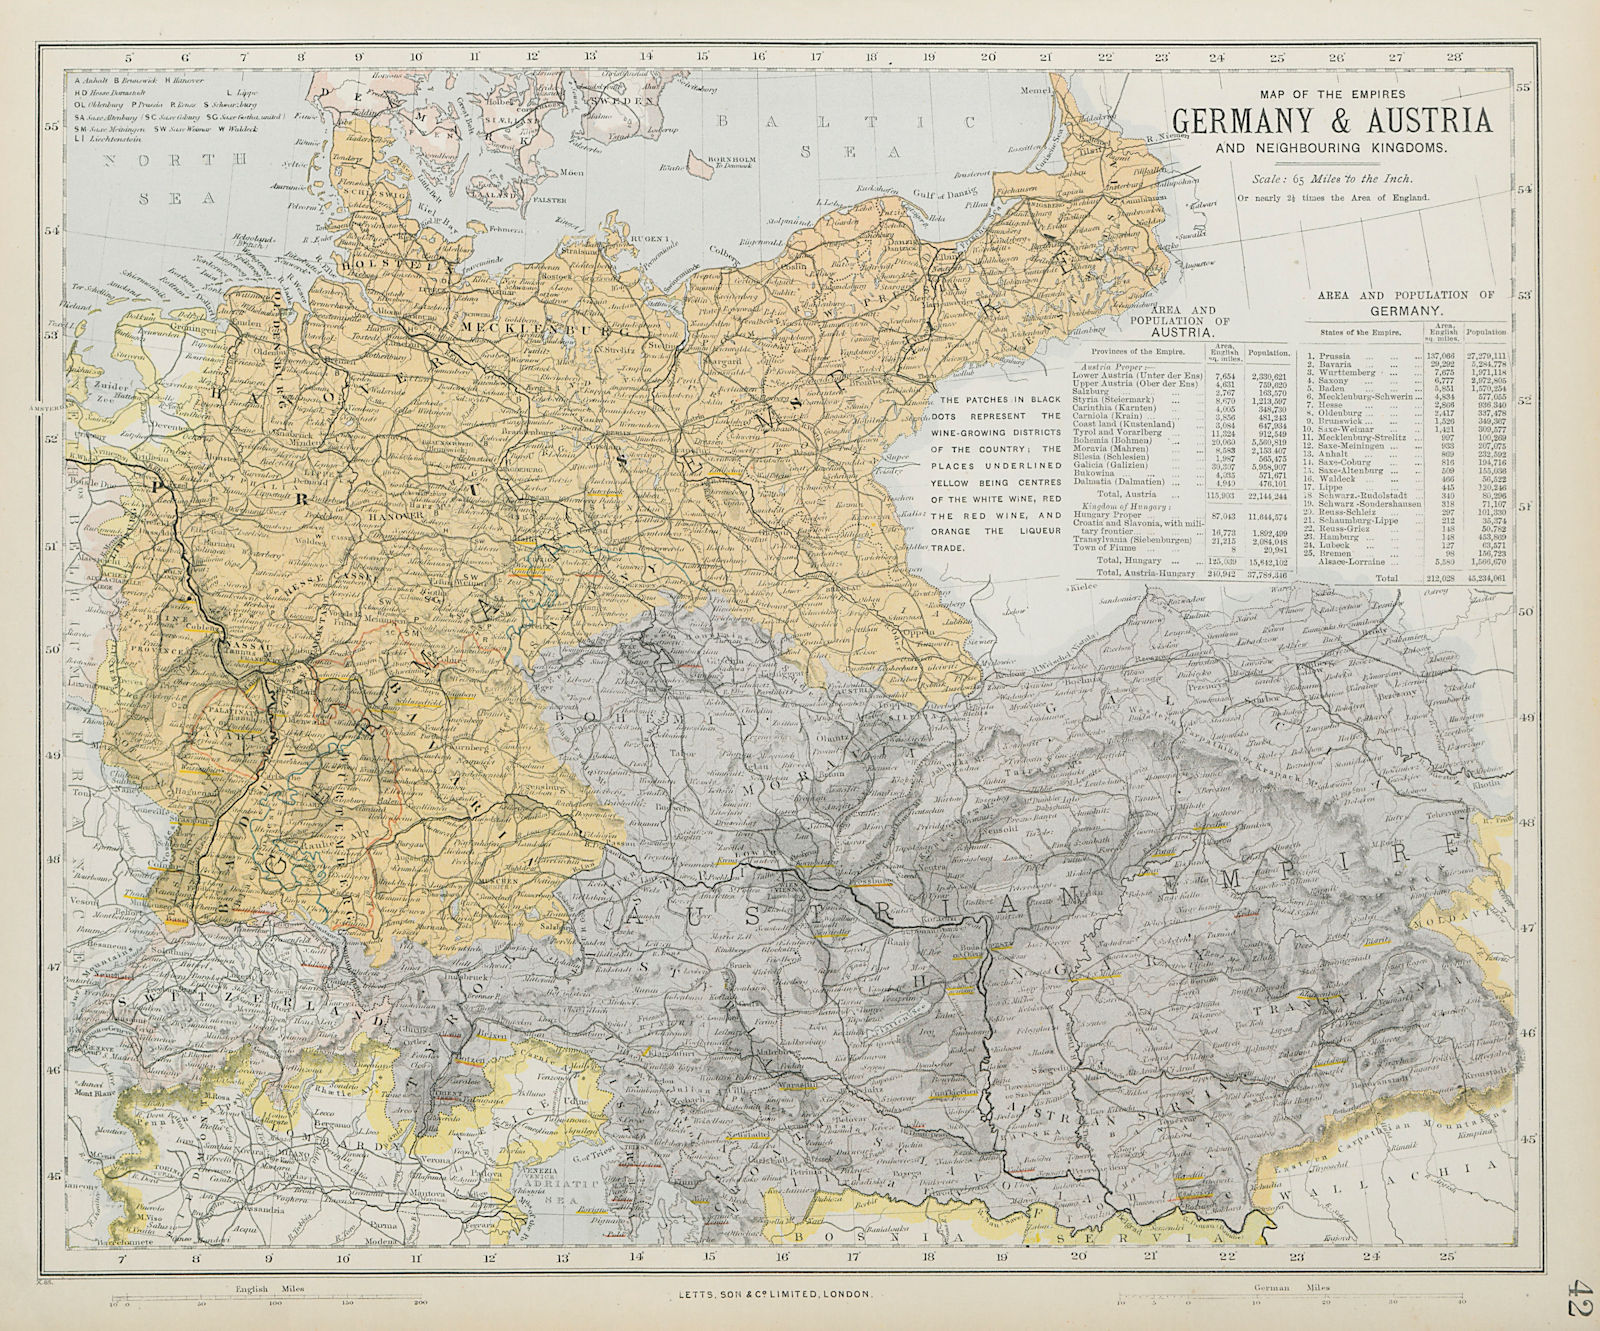 GERMANY & AUSTRIA-HUNGARY wine growing regions in grey. LETTS 1884 old map